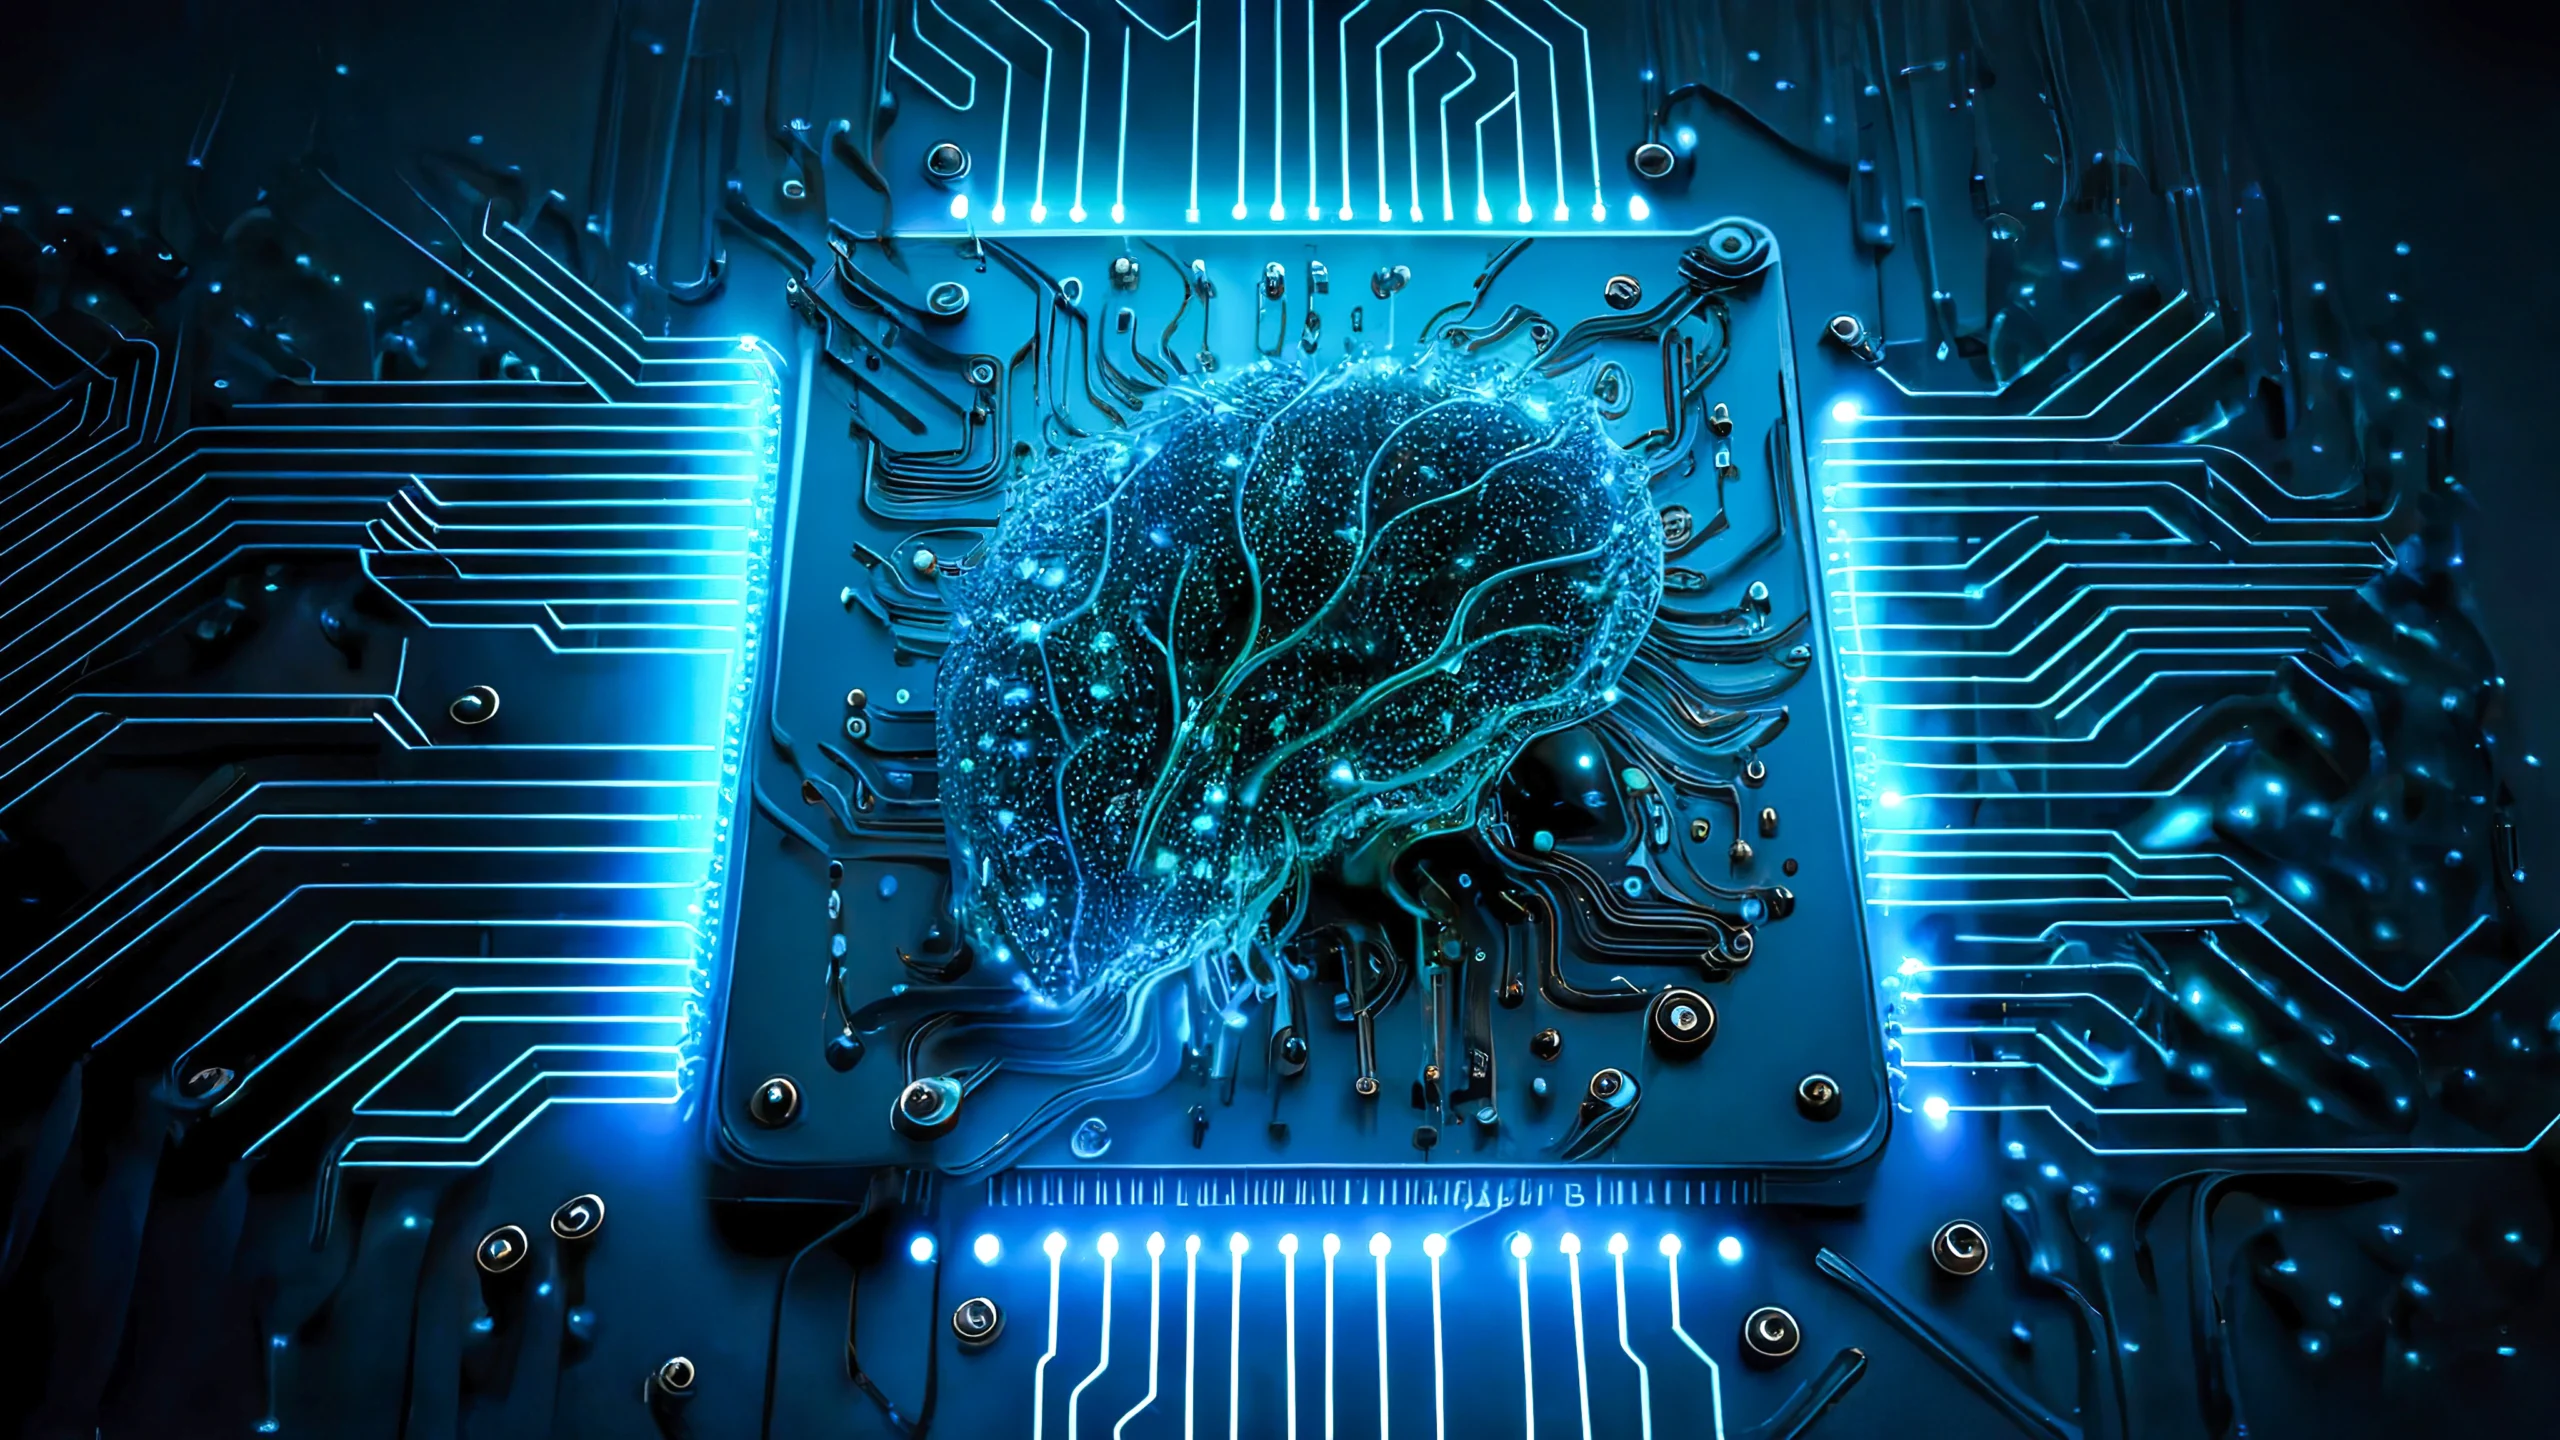 A stock photo showcasing a manufactured brain connected to technology